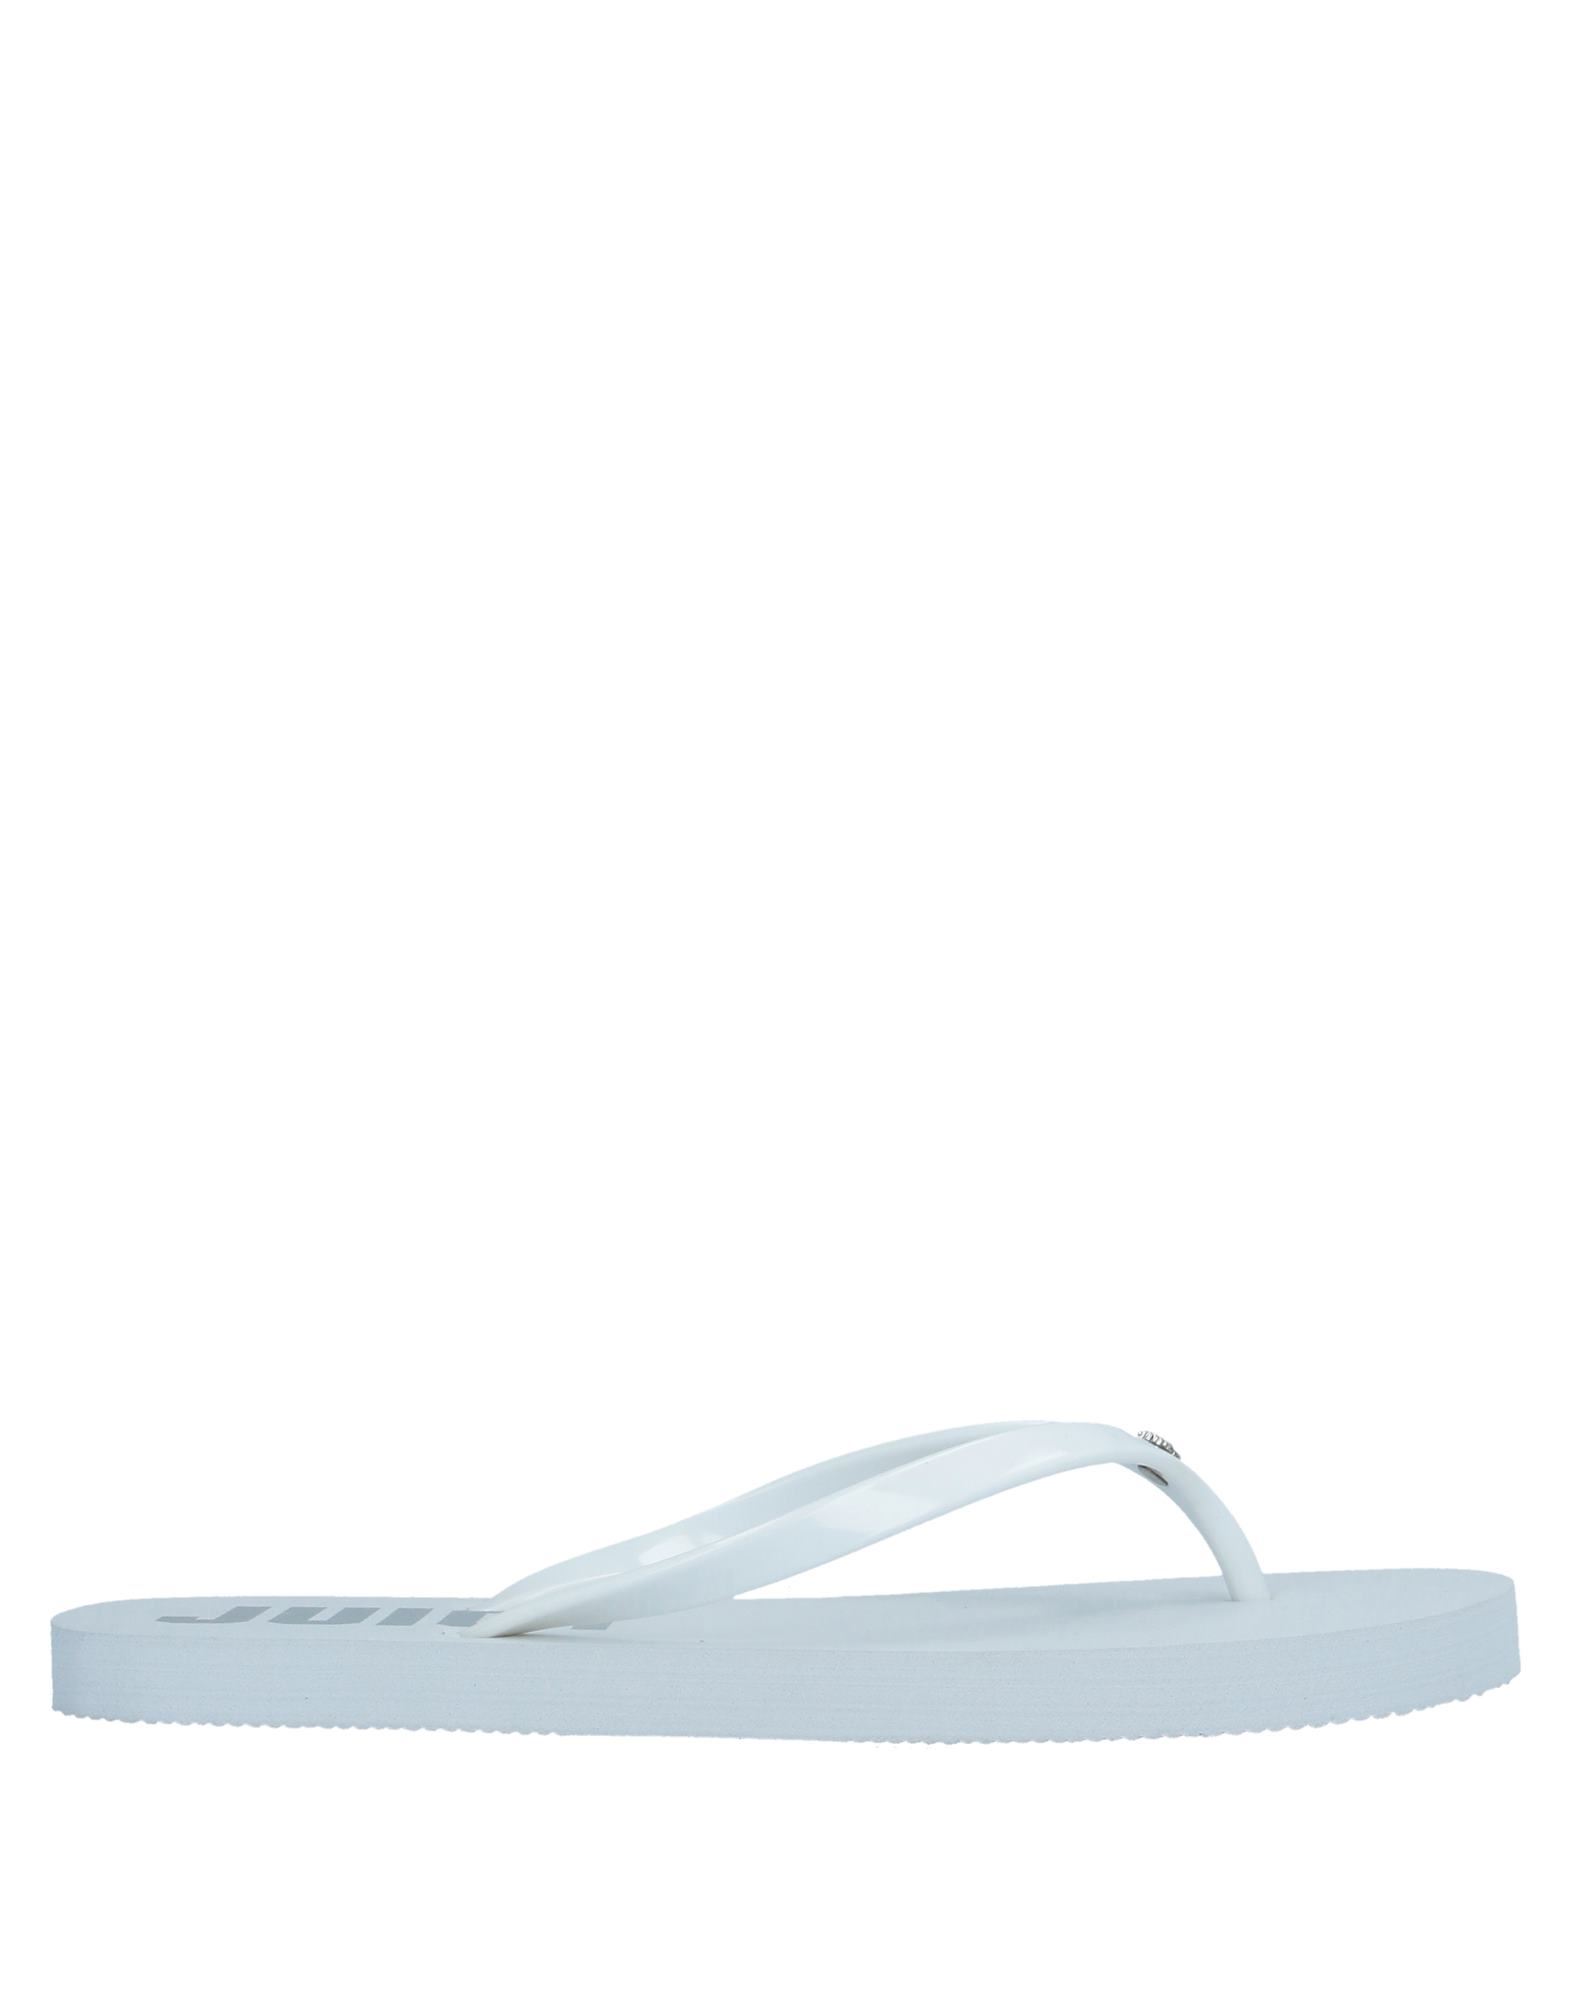 Juicy Couture Toe Strap Sandals In White